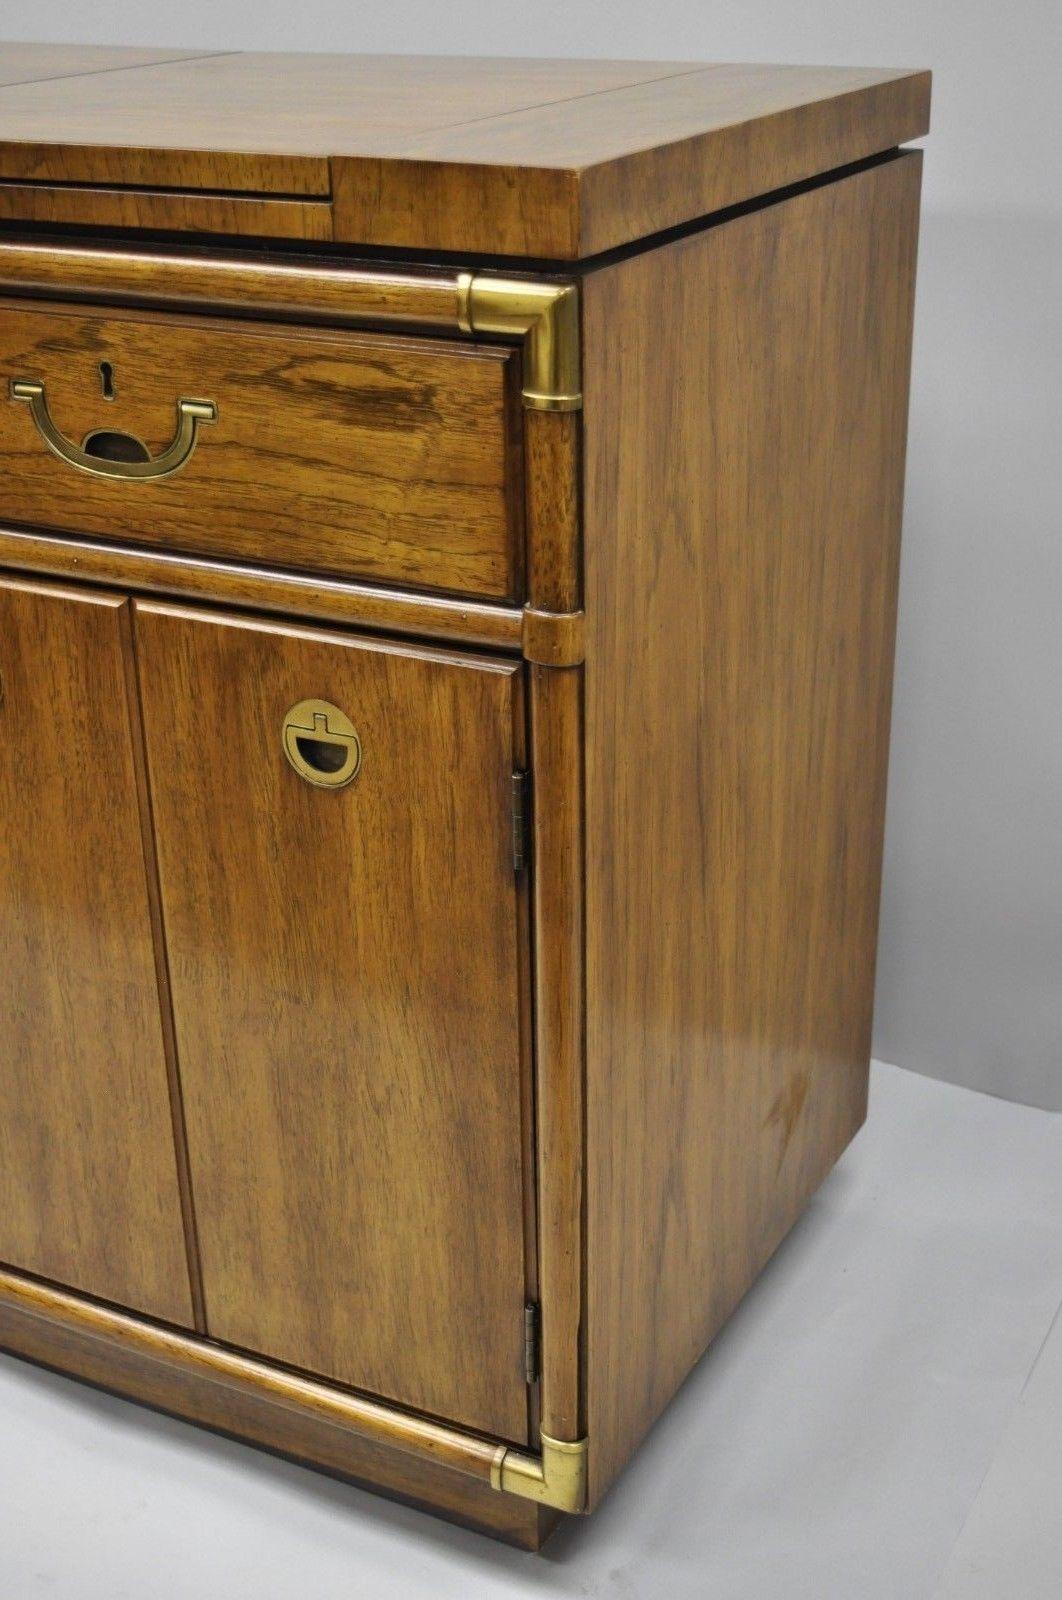 20th Century Drexel Heritage Accolade Campaign Style Flip-Top Bar Buffet Server Cabinet